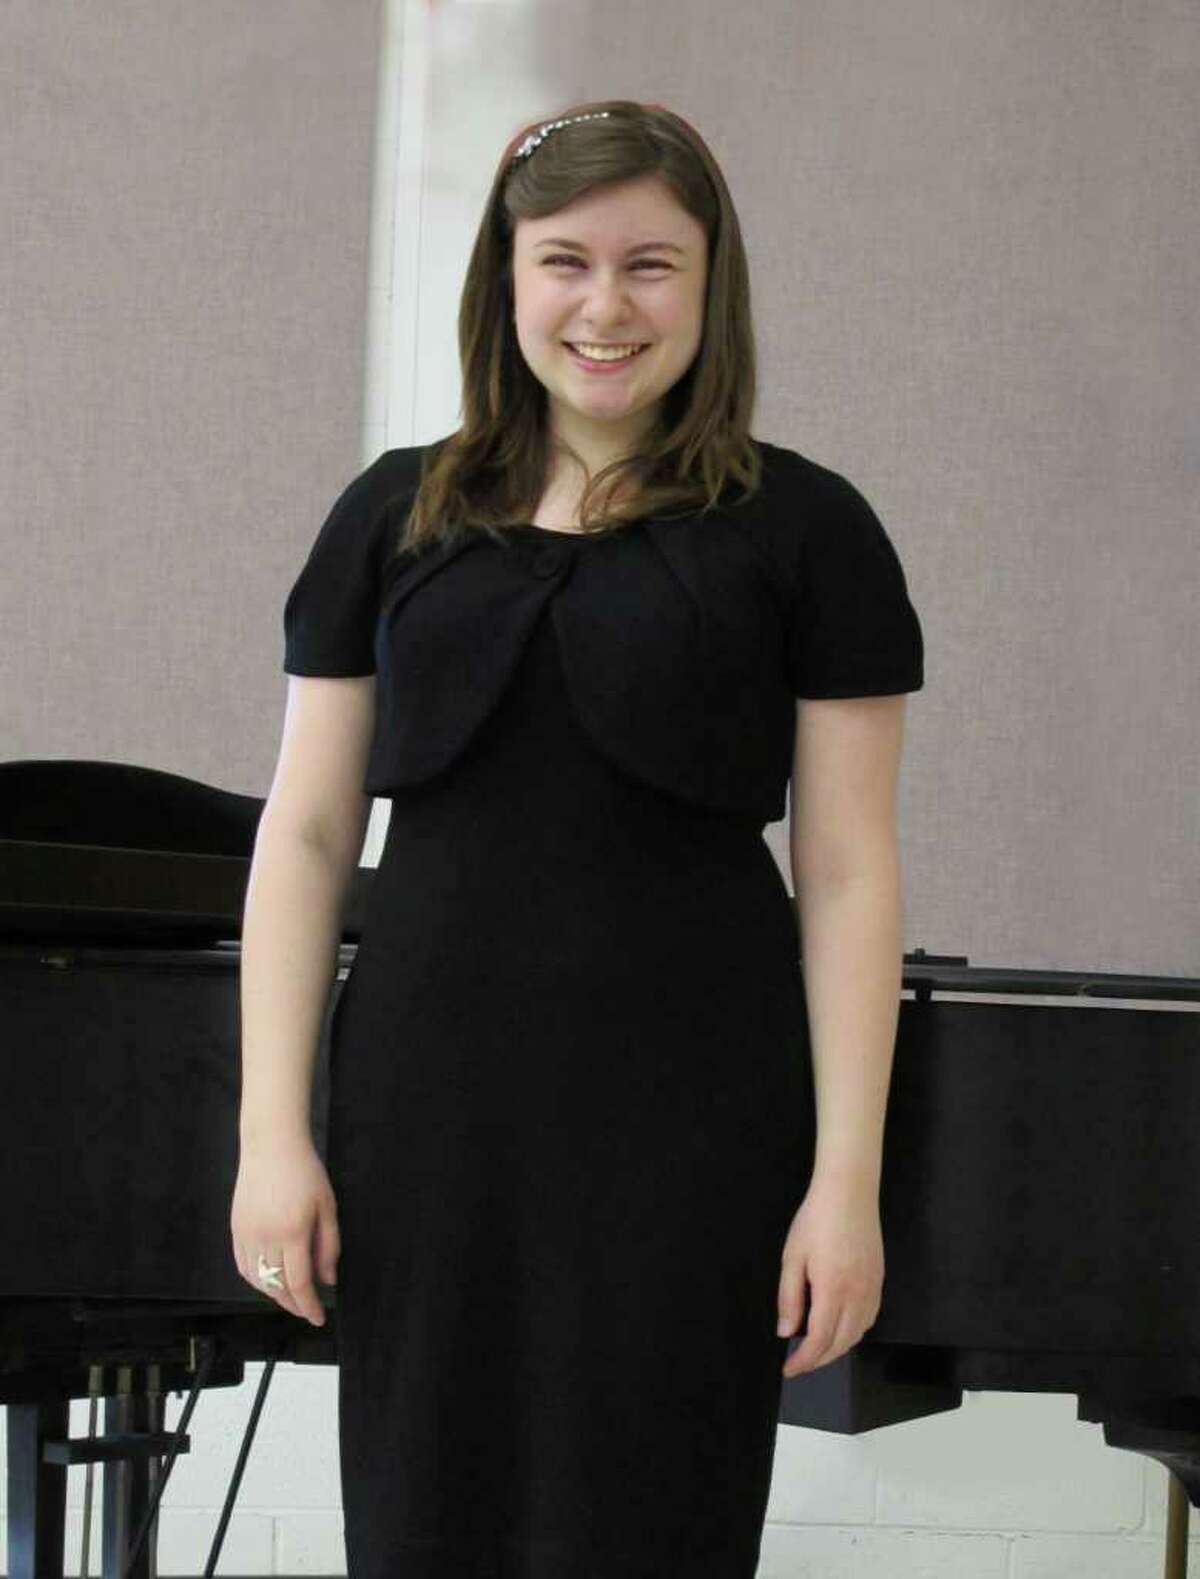 Music for Youth Scholarship winner Erica Intilangelo, of Fairfield, will perform at the Music for Youth benefit at 5 p.m. on Saturday, Nov. 6, 2010 at Southport's Trinity Episcopal Church.